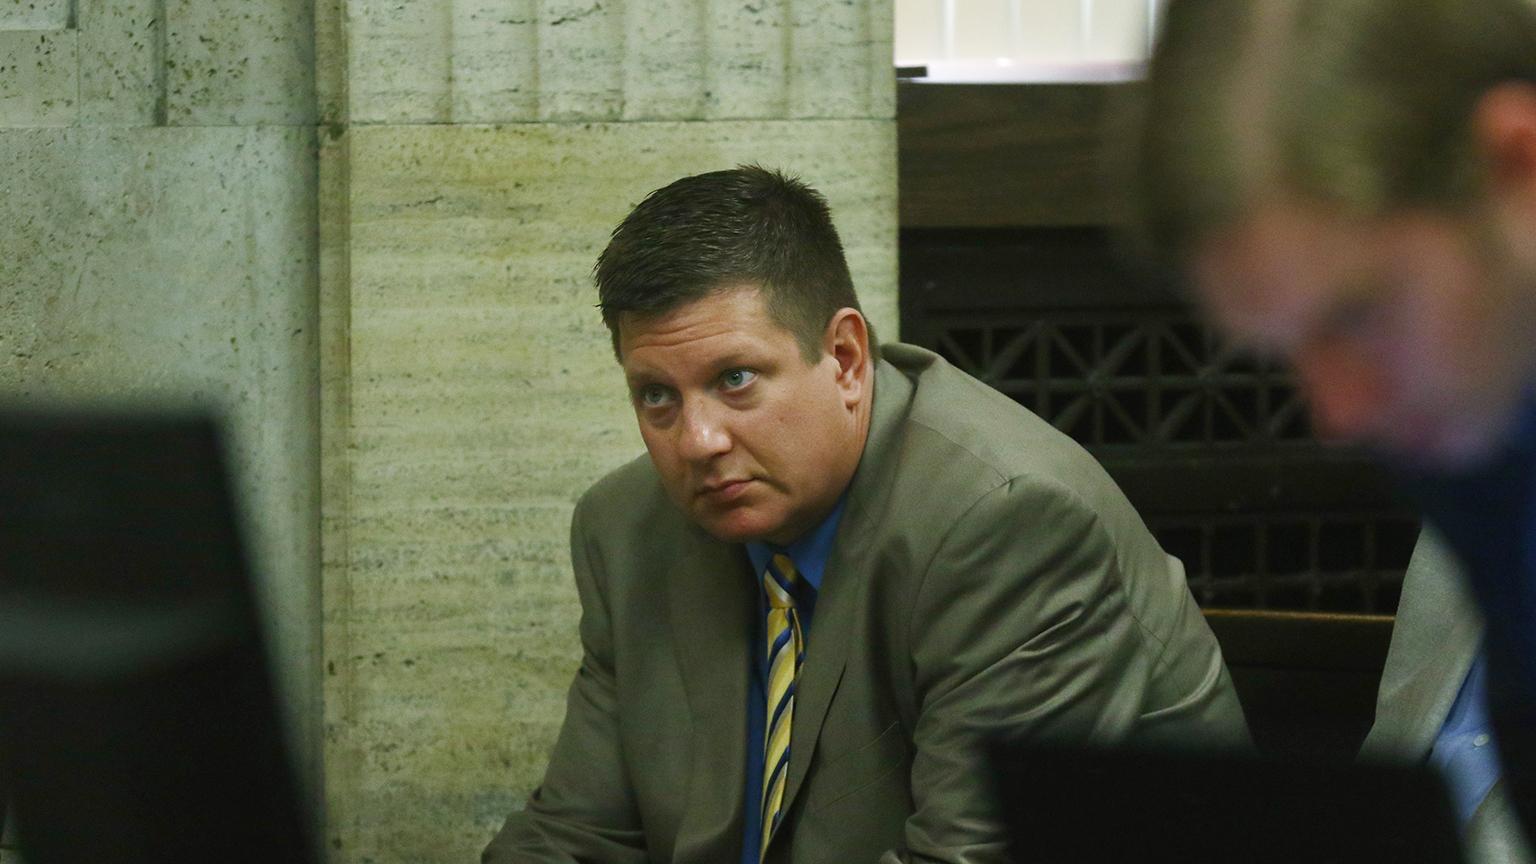 Chicago police Officer Jason Van Dyke sits in a courtroom during a hearing Tuesday, Aug. 7, 2018, at the Leighton Criminal Court Building in Chicago. (John J. Kim / Chicago Tribune / Pool)